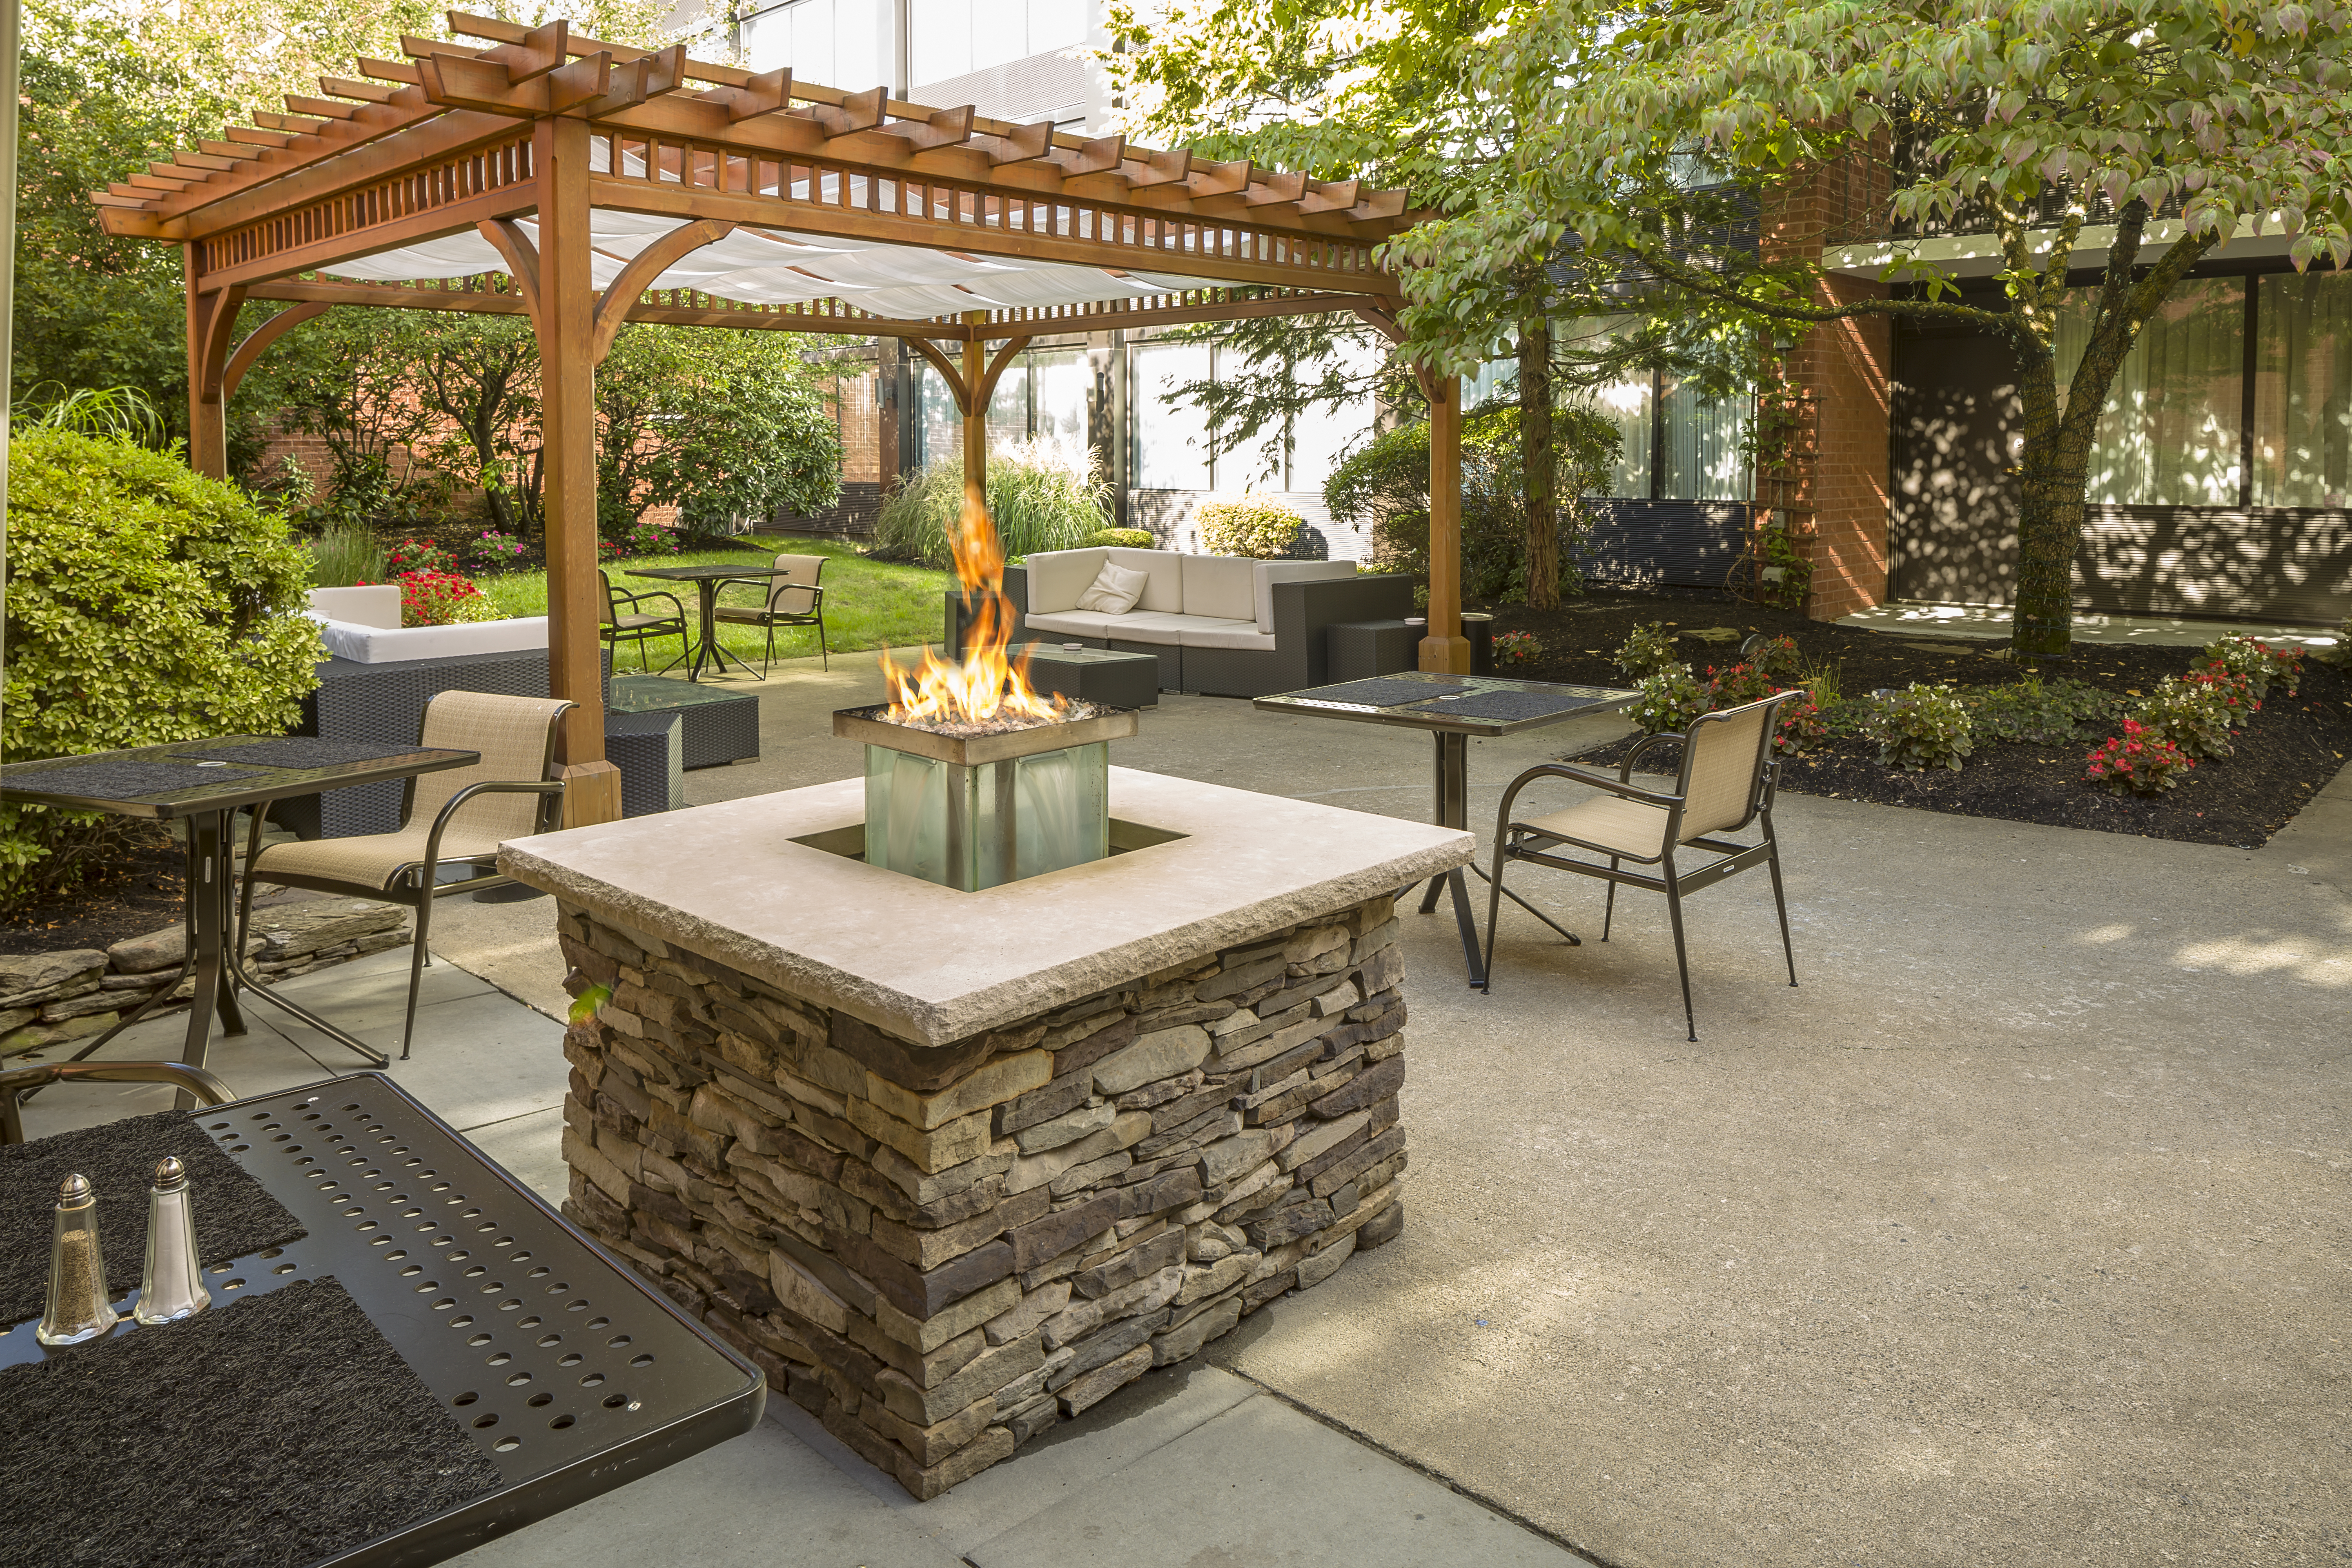  Tables and Chairs Around Fire Pit and Pavilion on Hotel Exterior Patio Surrounded by Trees